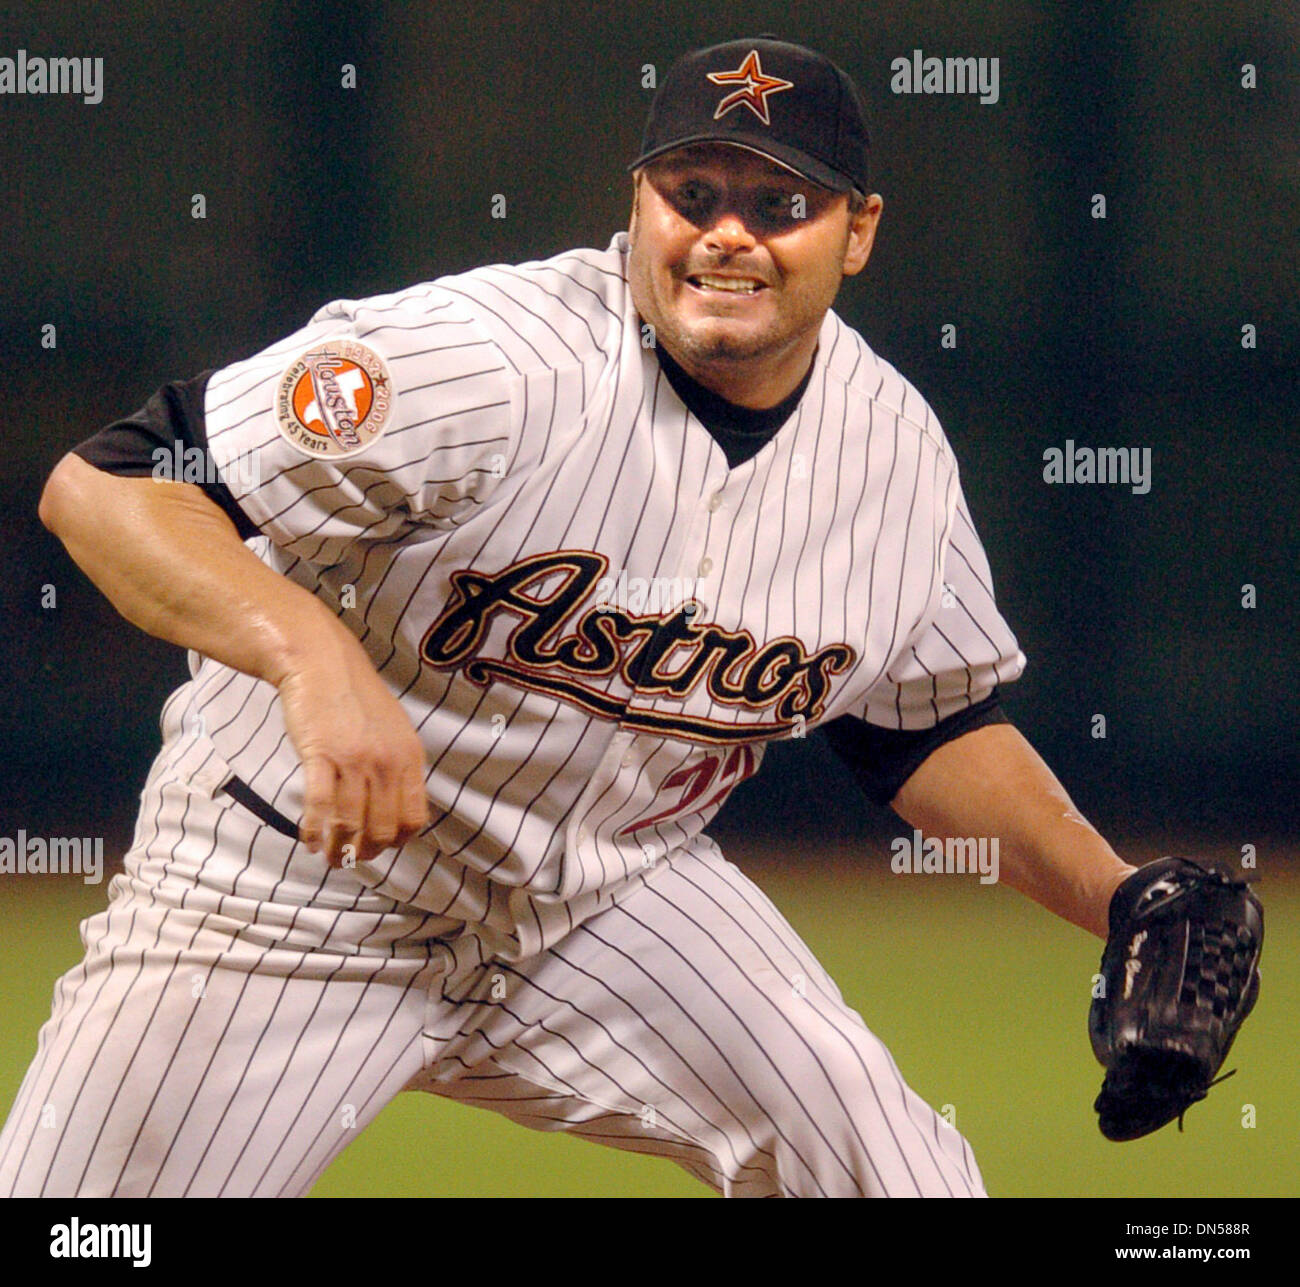 Jun 22, 2006; Houston, TX, USA; Astros ROGER CLEMENS winches as he waits  for the strike call from the ump bottom of the 3rd inning against the  Minnesota Twins at Minute Maid